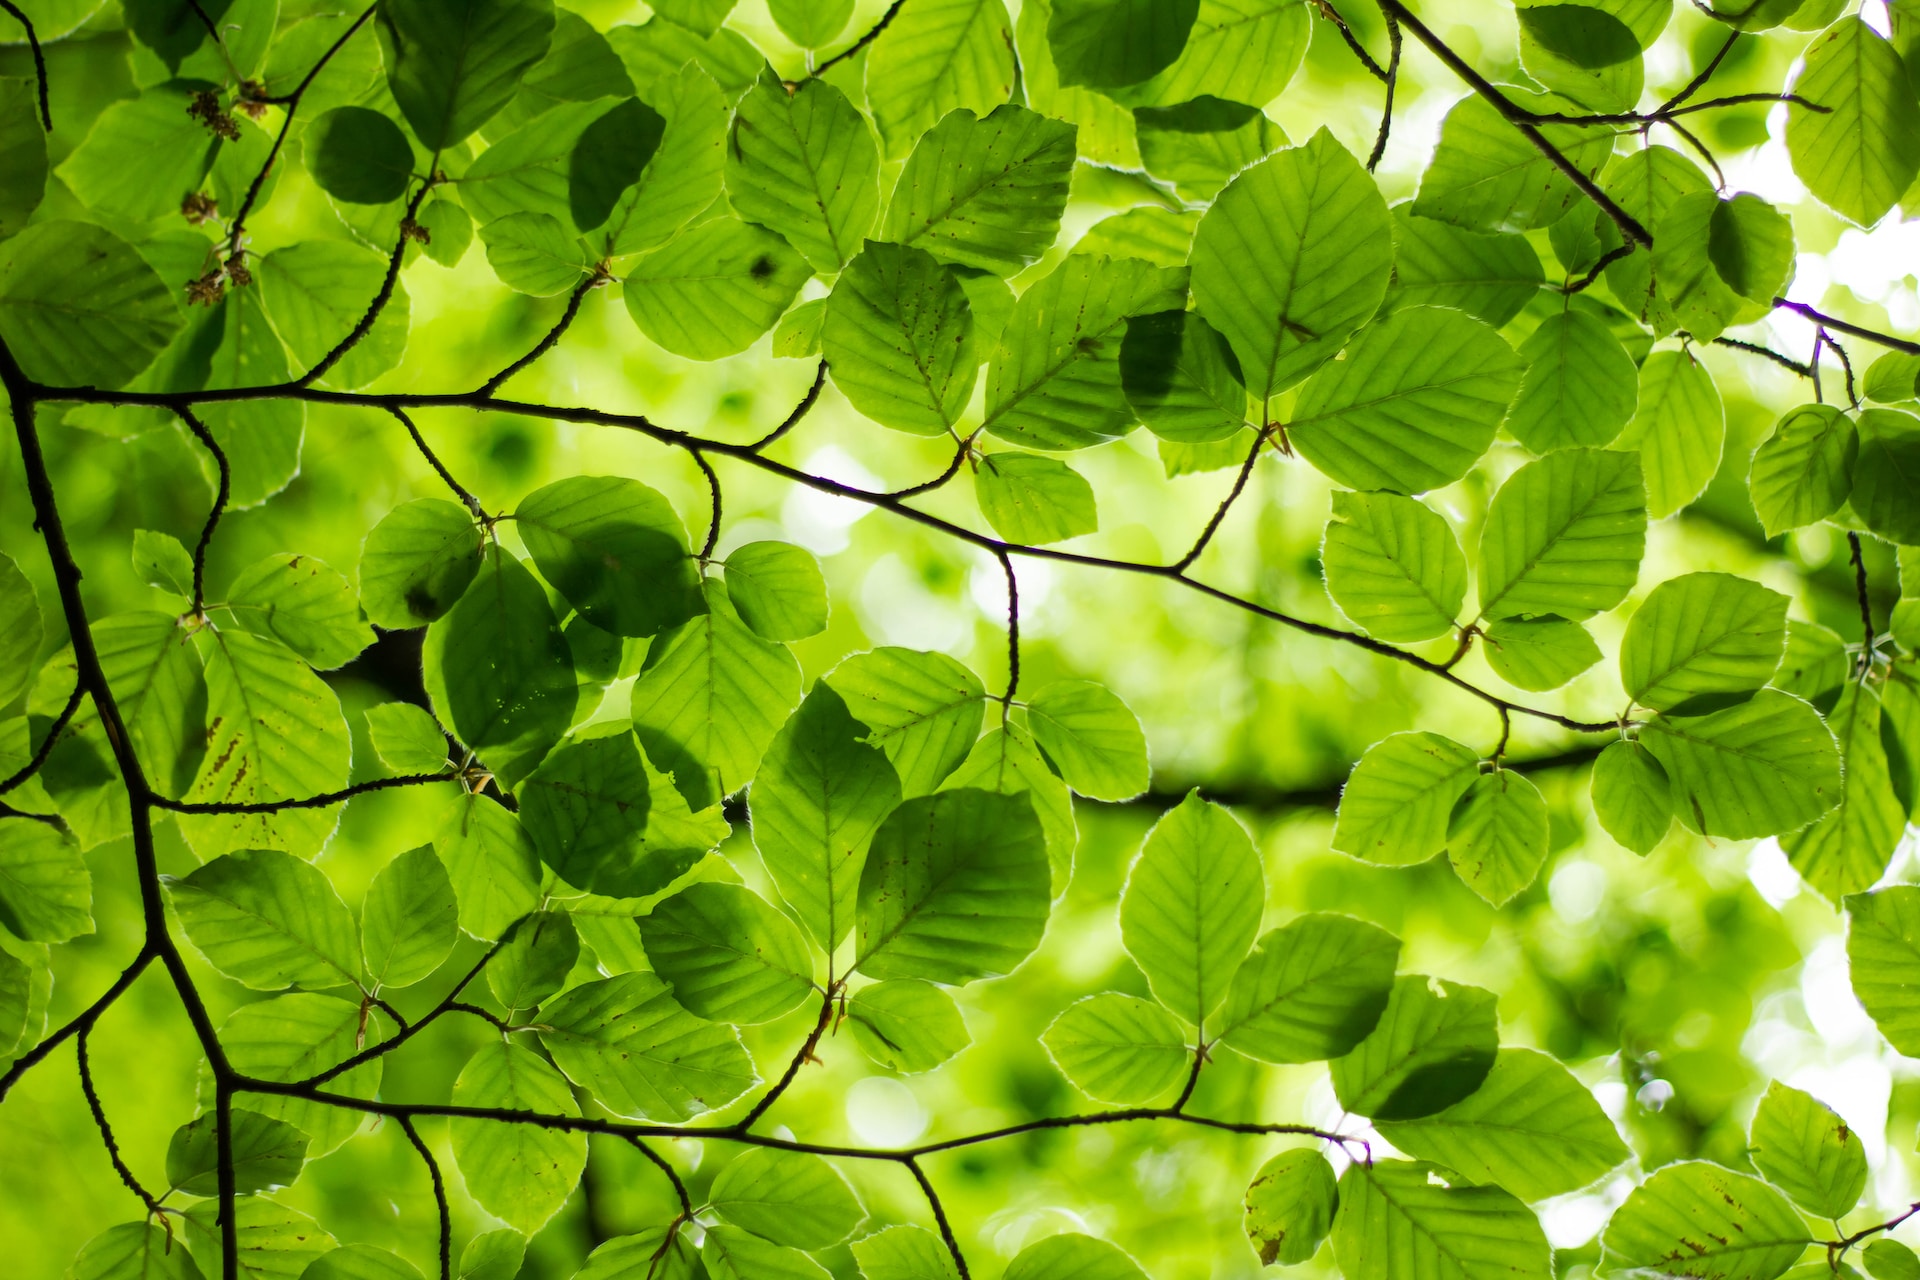 My ever greener lifestyle. Image of green leaves in sunlight.